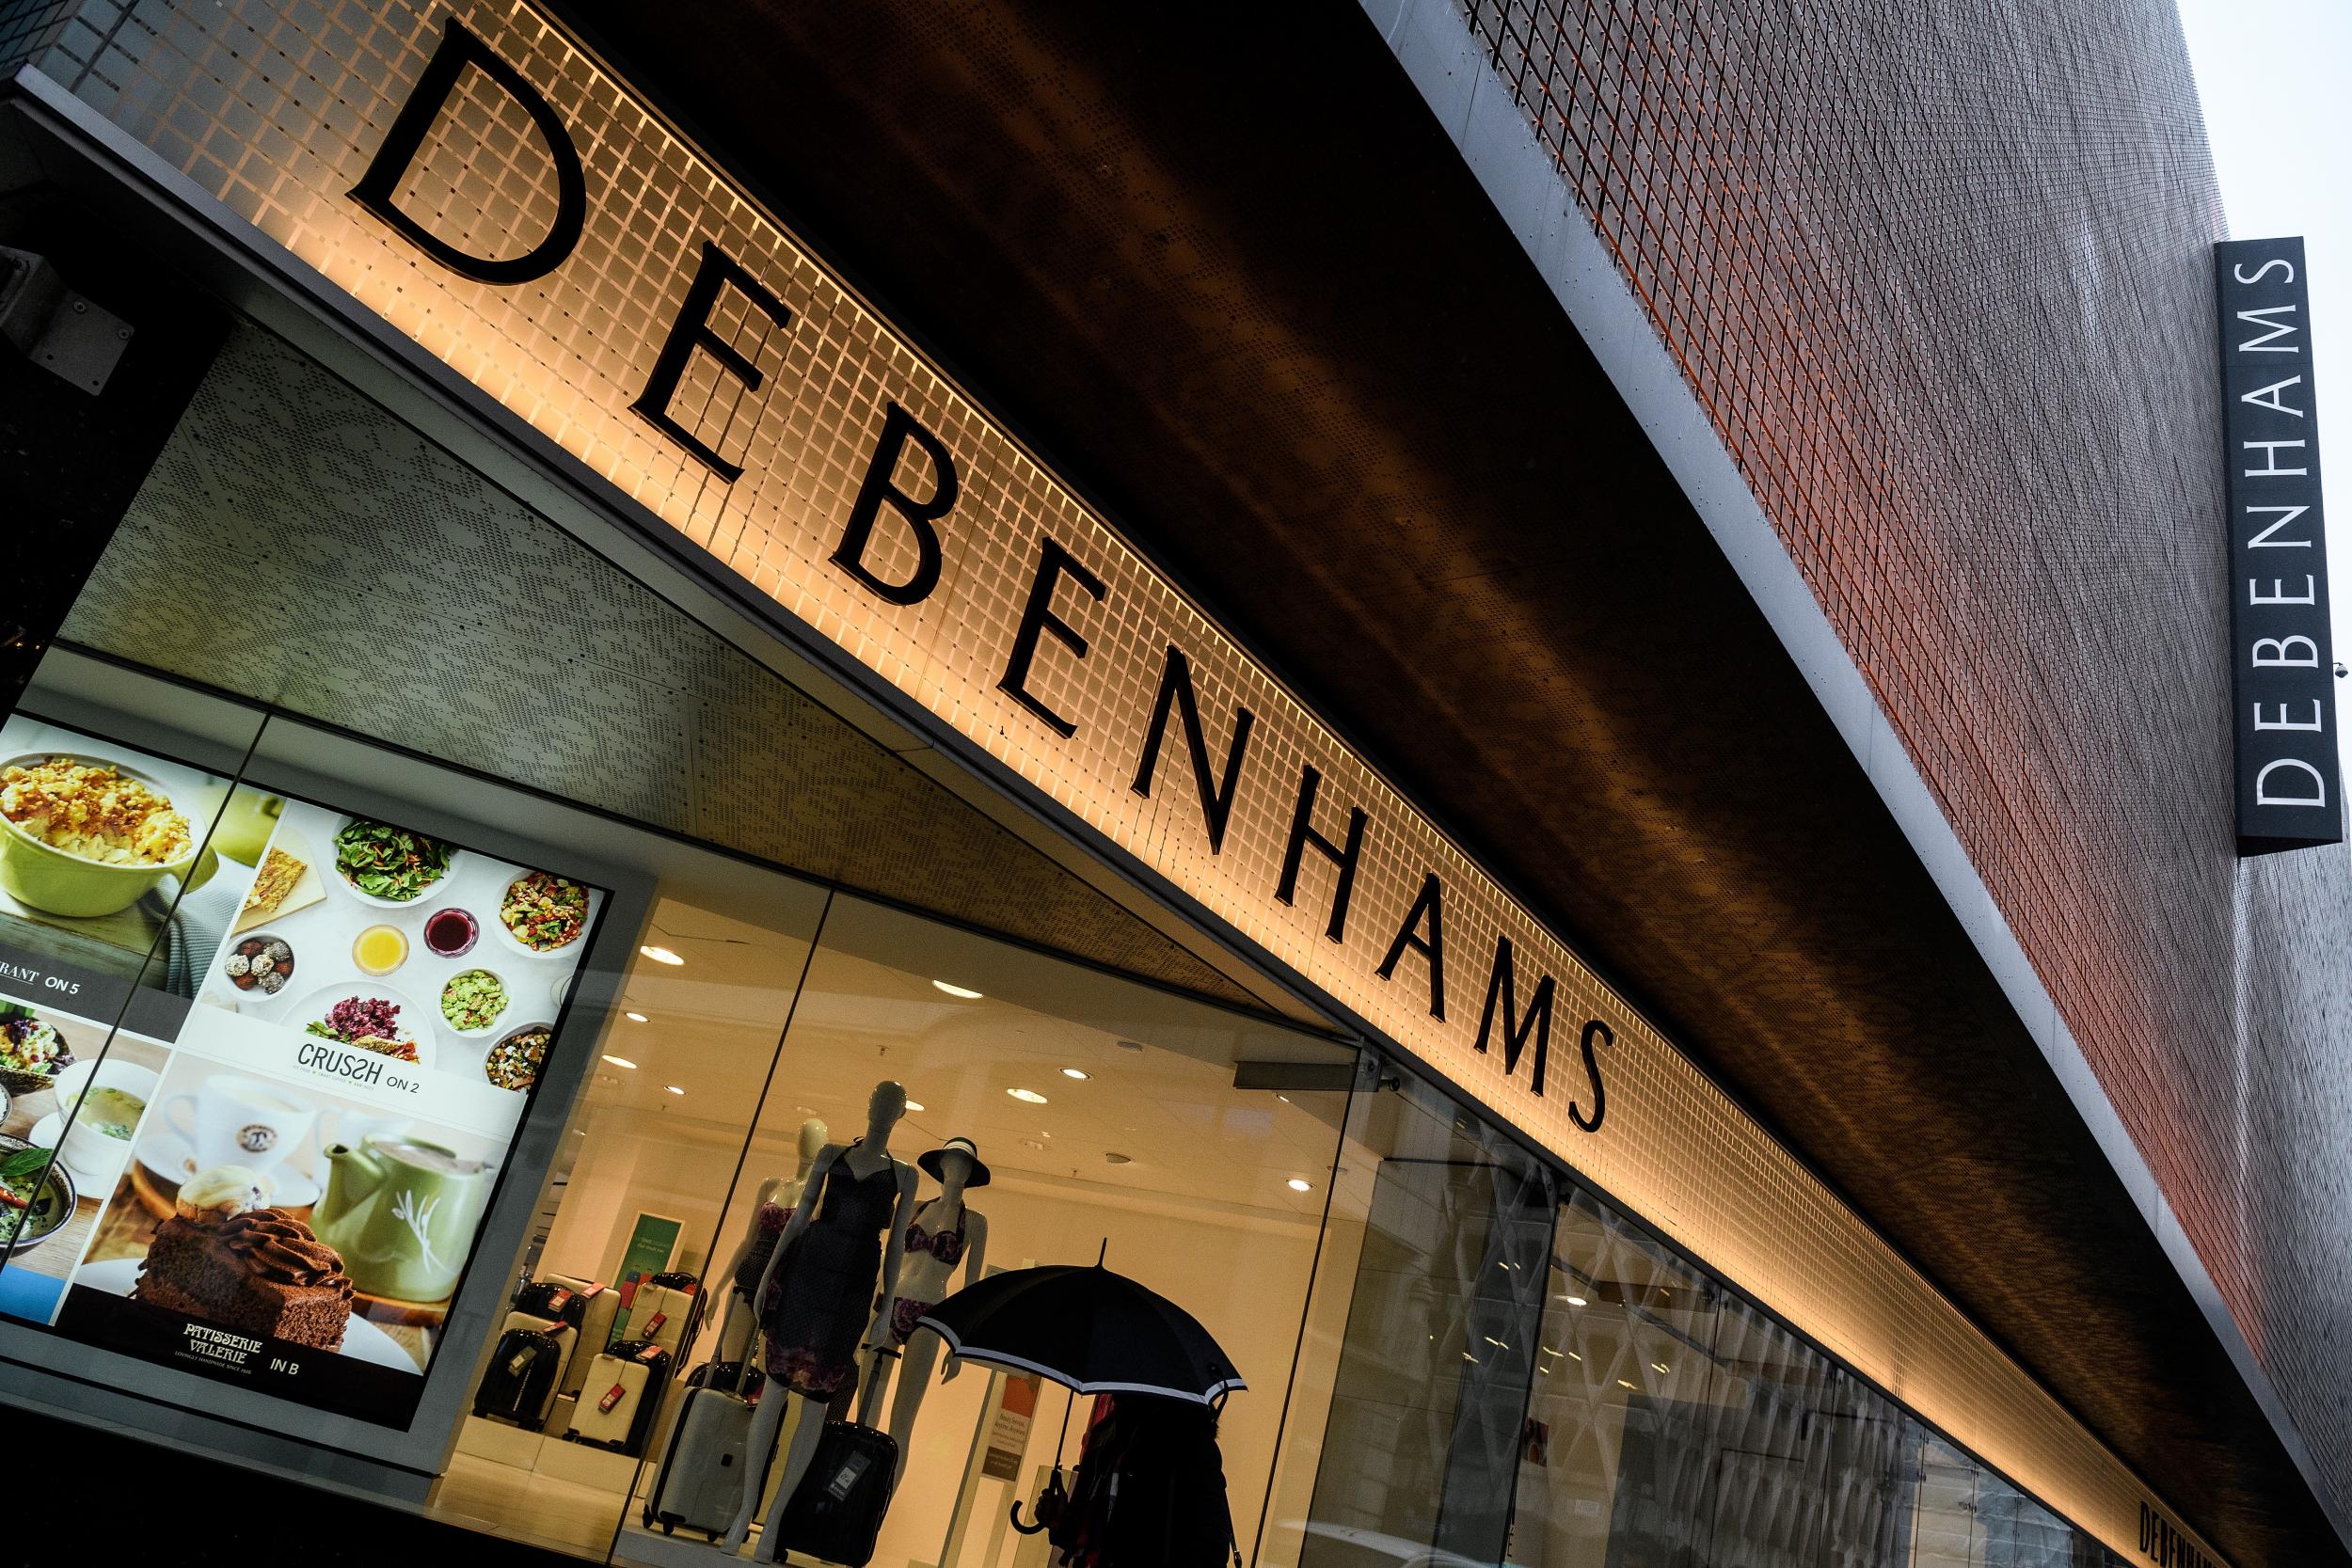 Debenhams said it plans to refocus the business on three core areas: beauty, fashion and home, and food and events